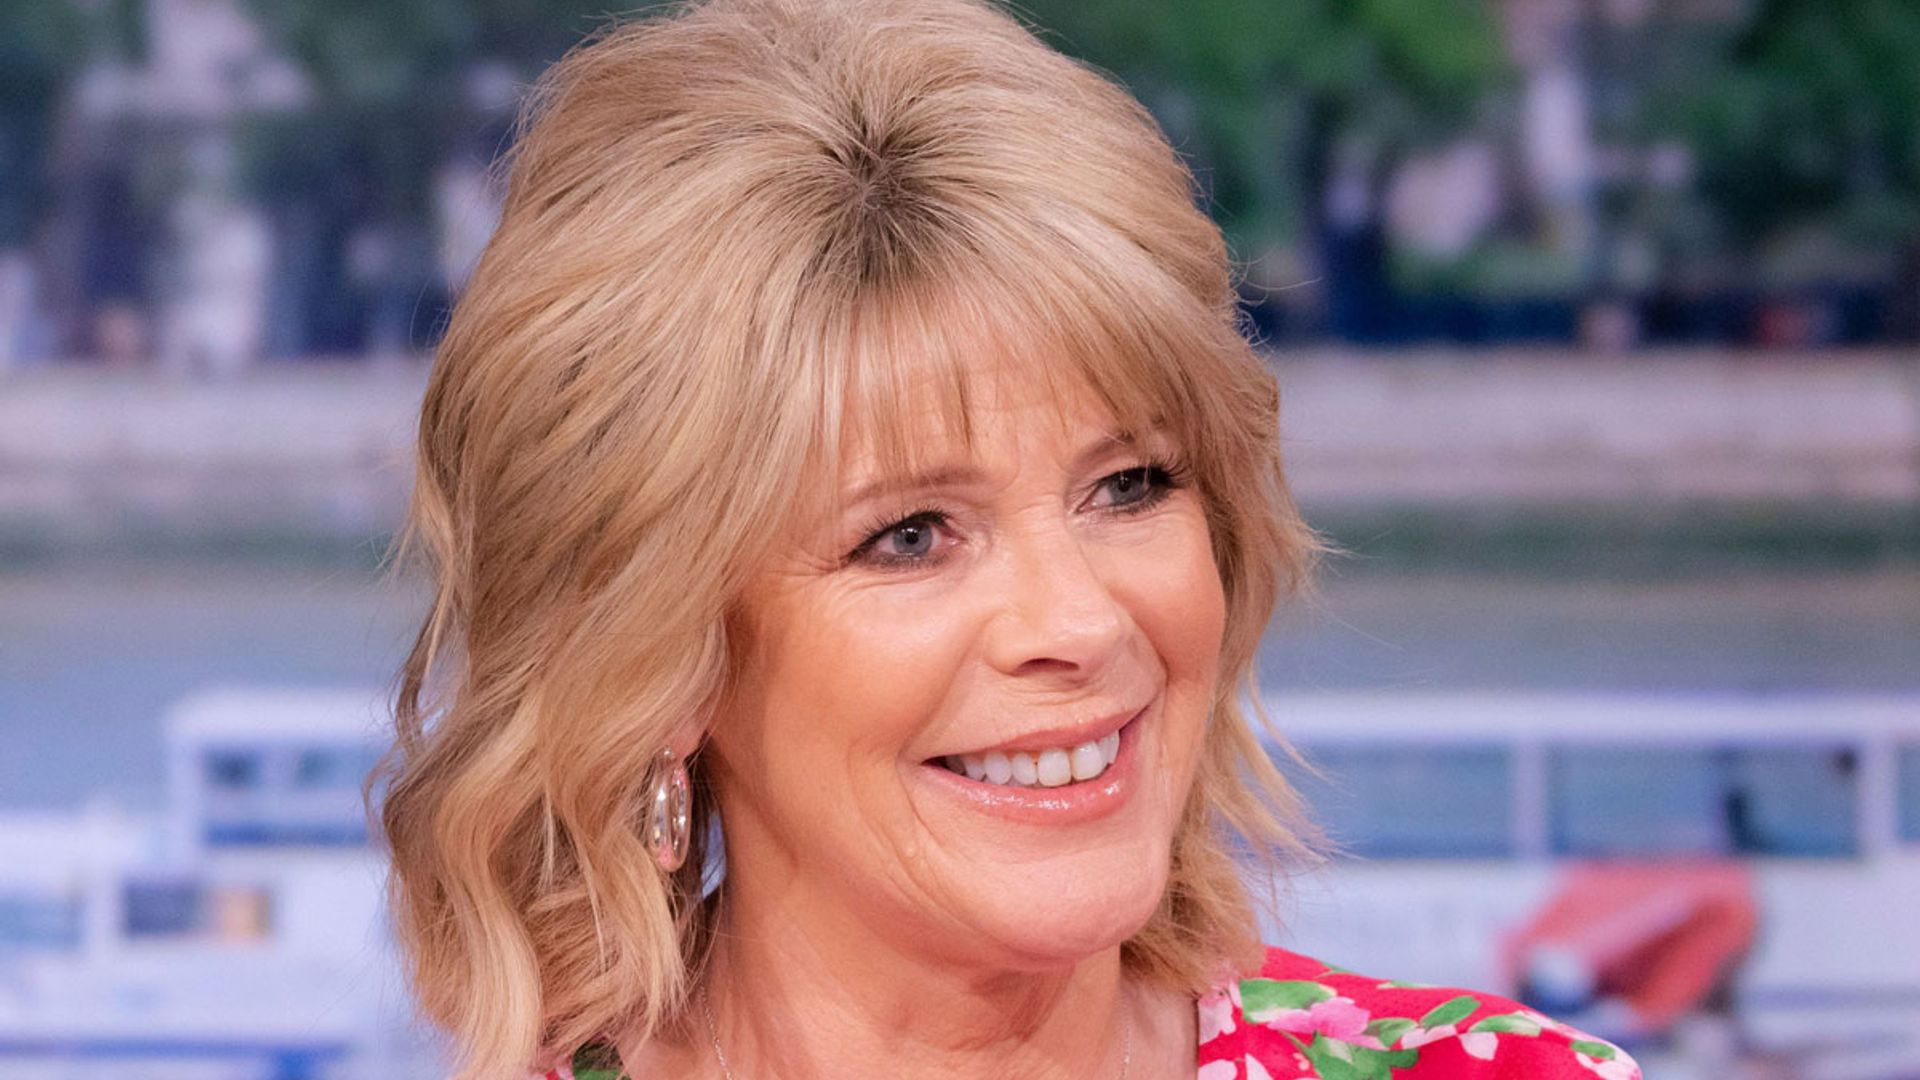 How to get Ruth Langsford's This Morning hot pink Zara suit